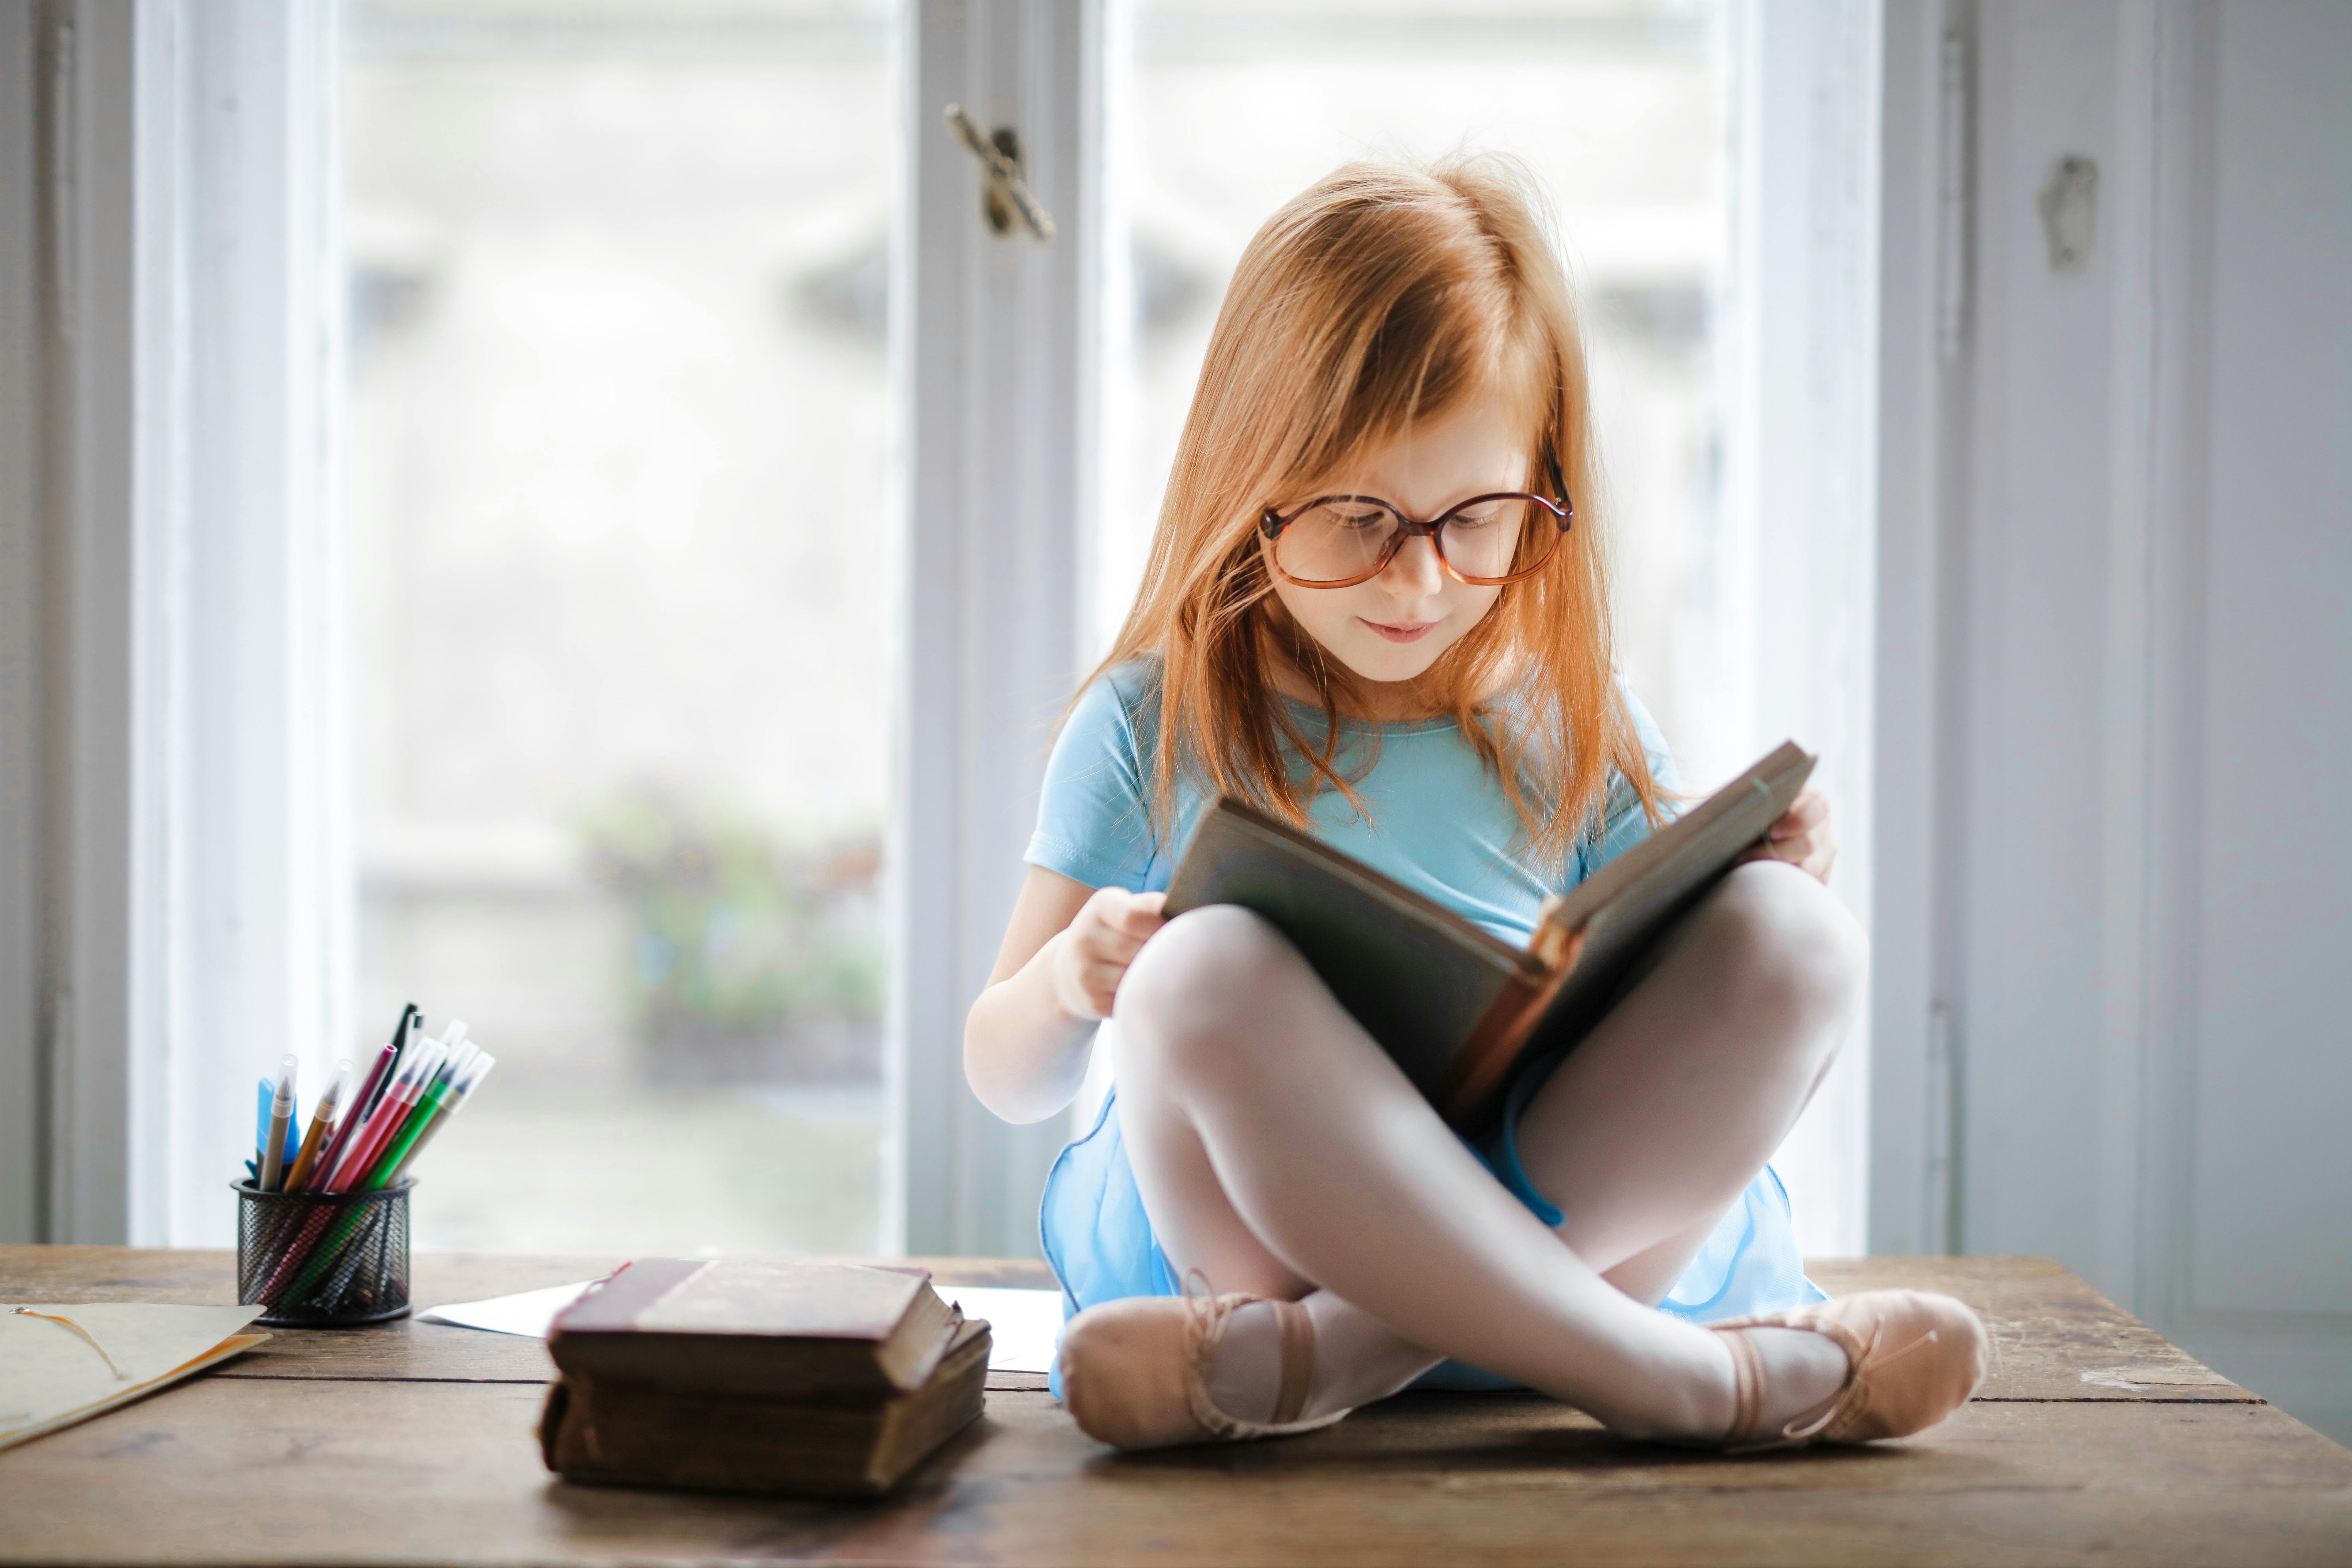 A child reading a book | Source: Pexels